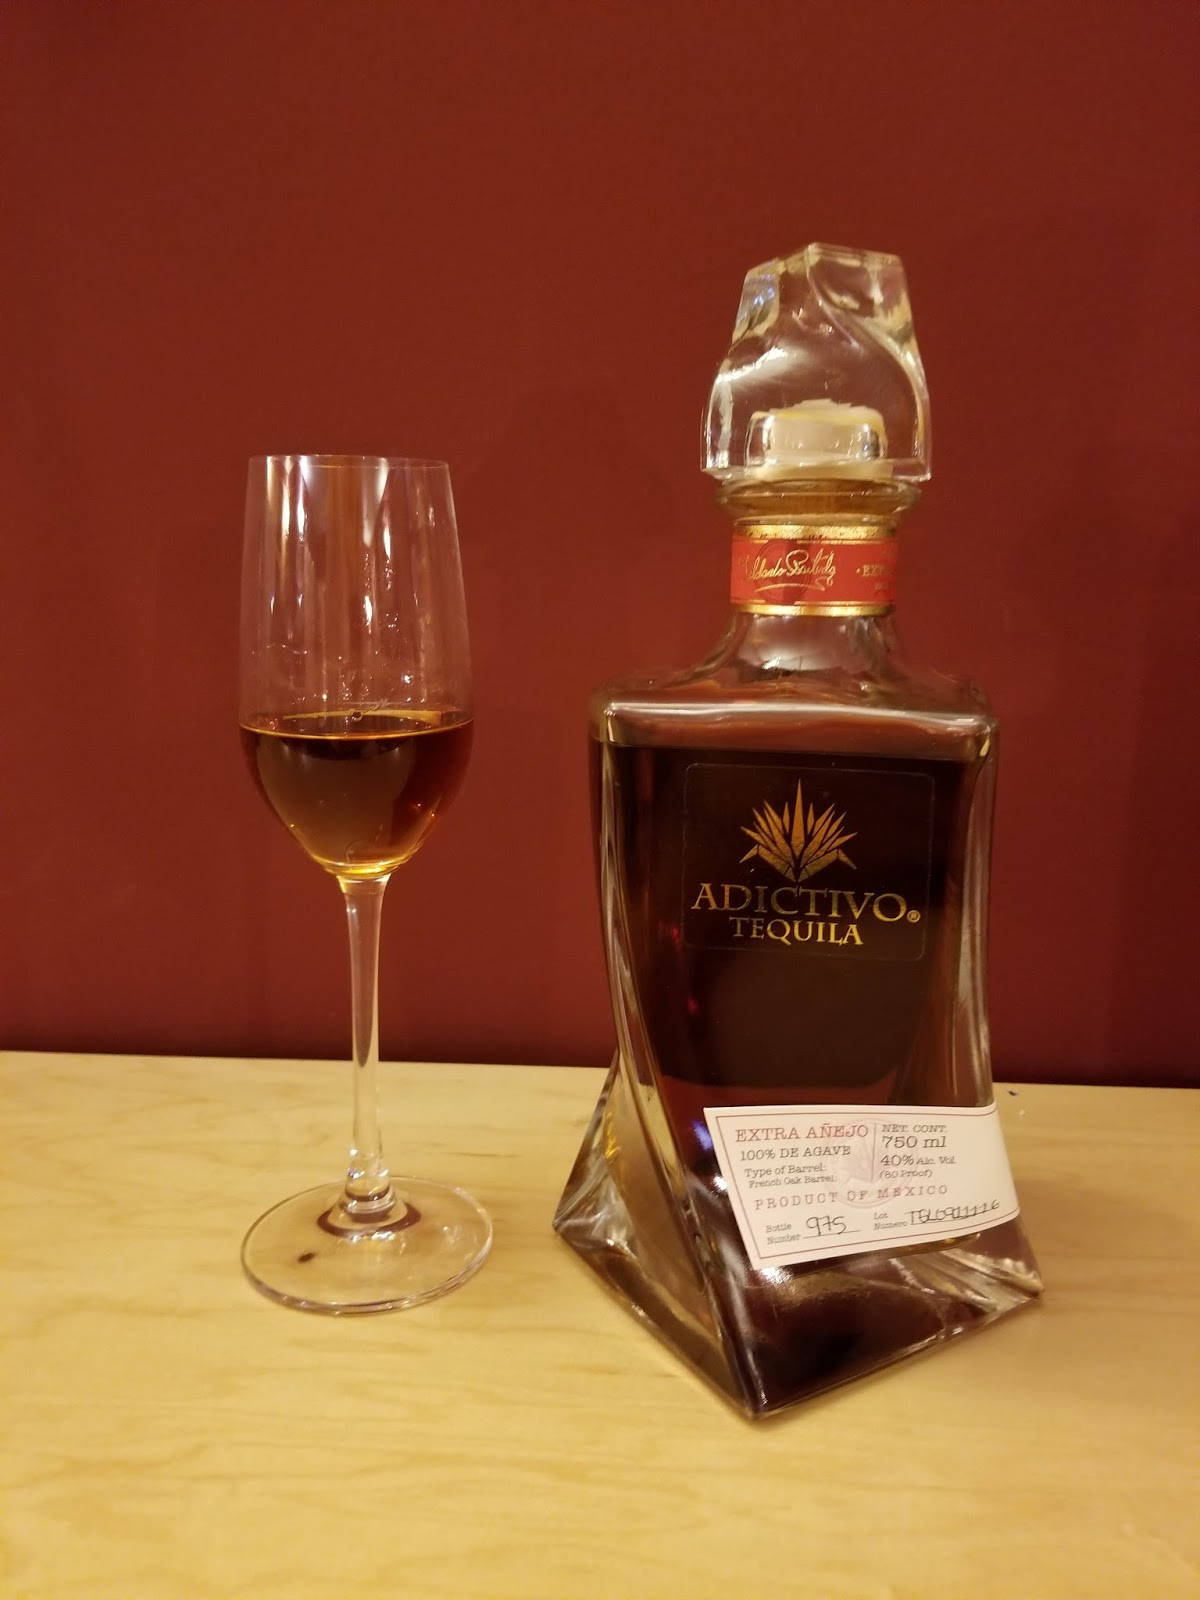 Adictivoextra Black Anejo Tequila Is Not A Sentence In English. It Appears To Be The Name Of A Brand Or Product. If You Provide A Sentence In English That You Would Like Me To Translate Into Italian, I Would Be Happy To Assist You. Sfondo